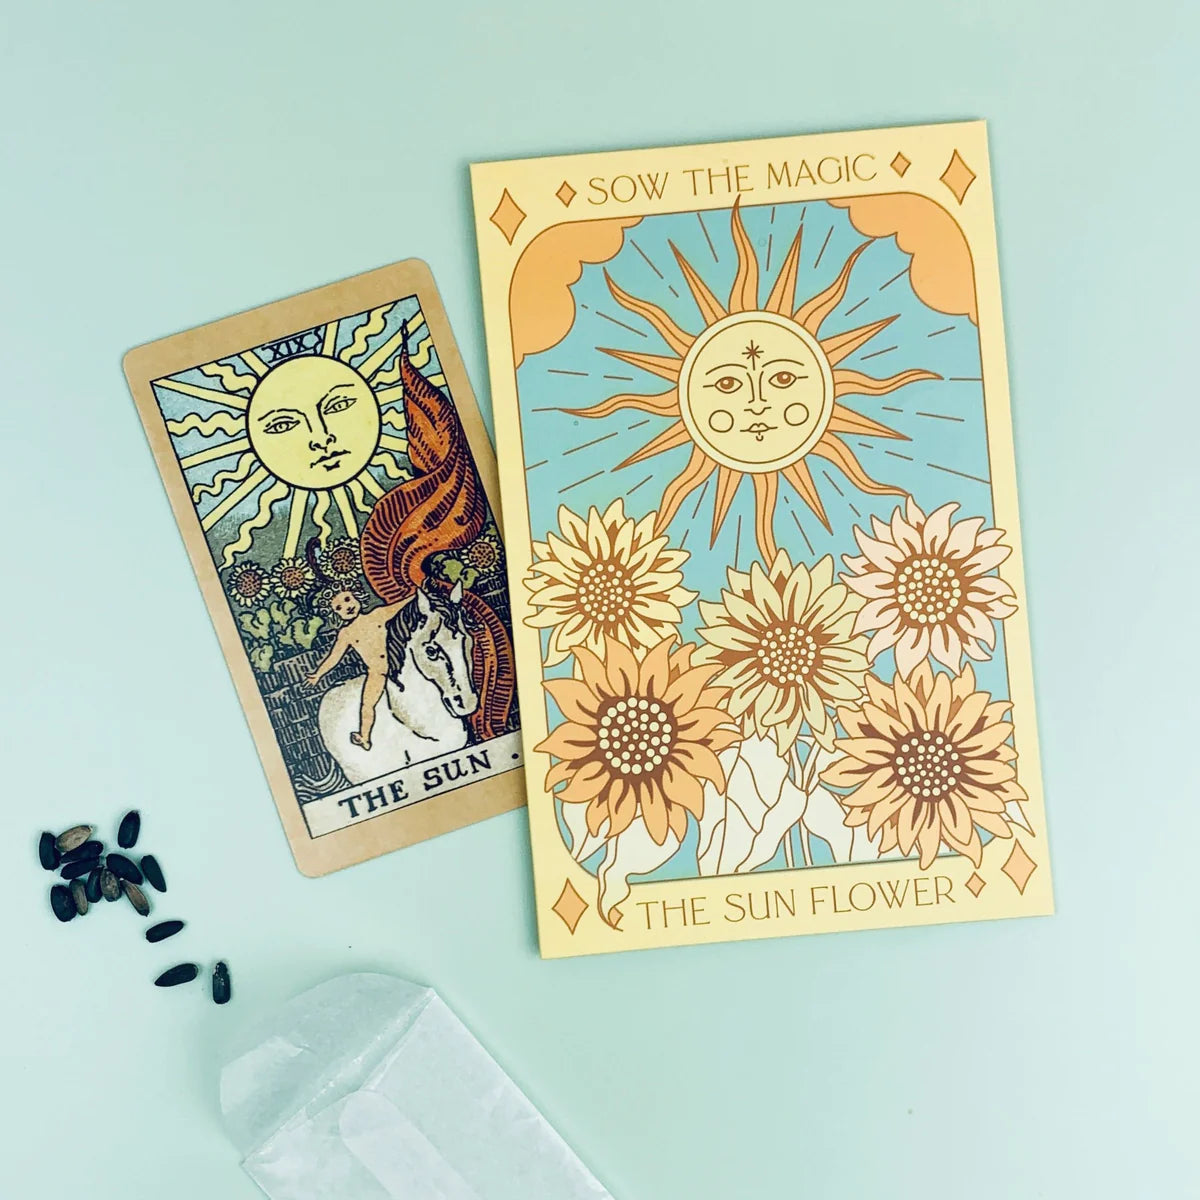 Sow the Magic The Sunflower (Ring of Fire) Tarot Seed Packet